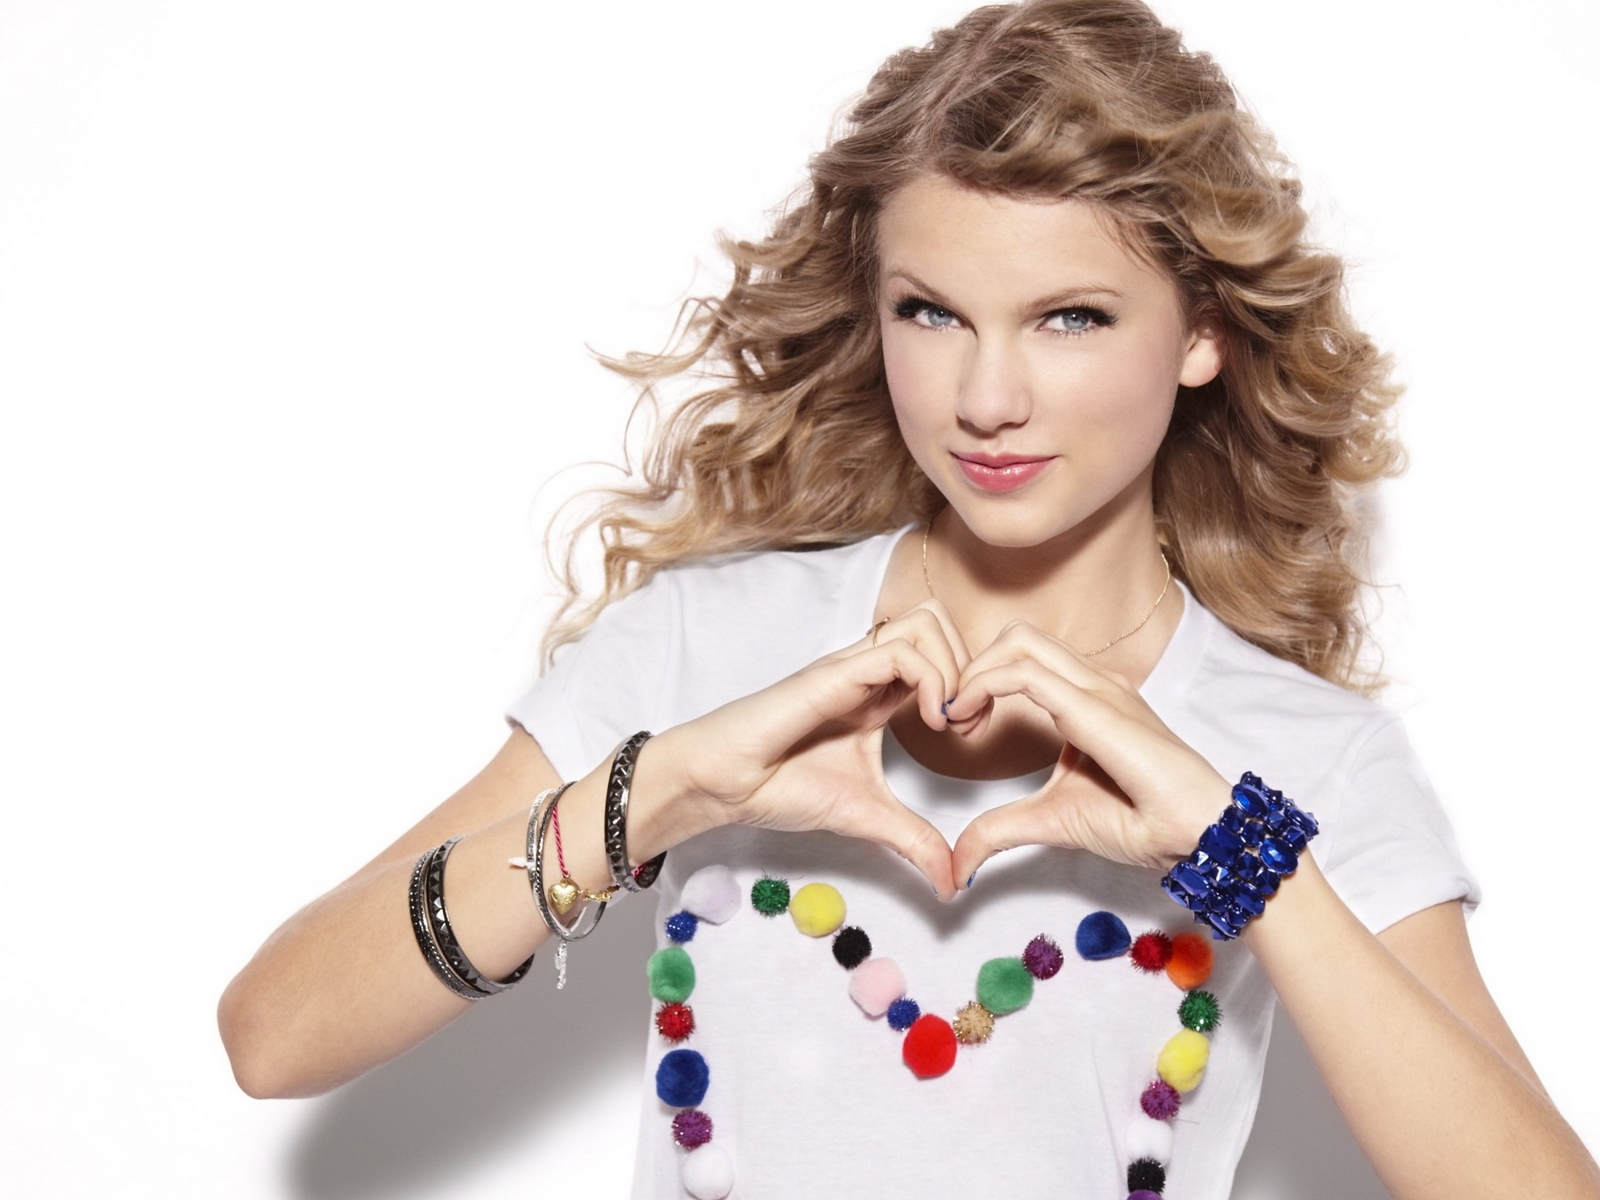 Taylor Swift Wallpapers For Mobile | Hd Wallpapers